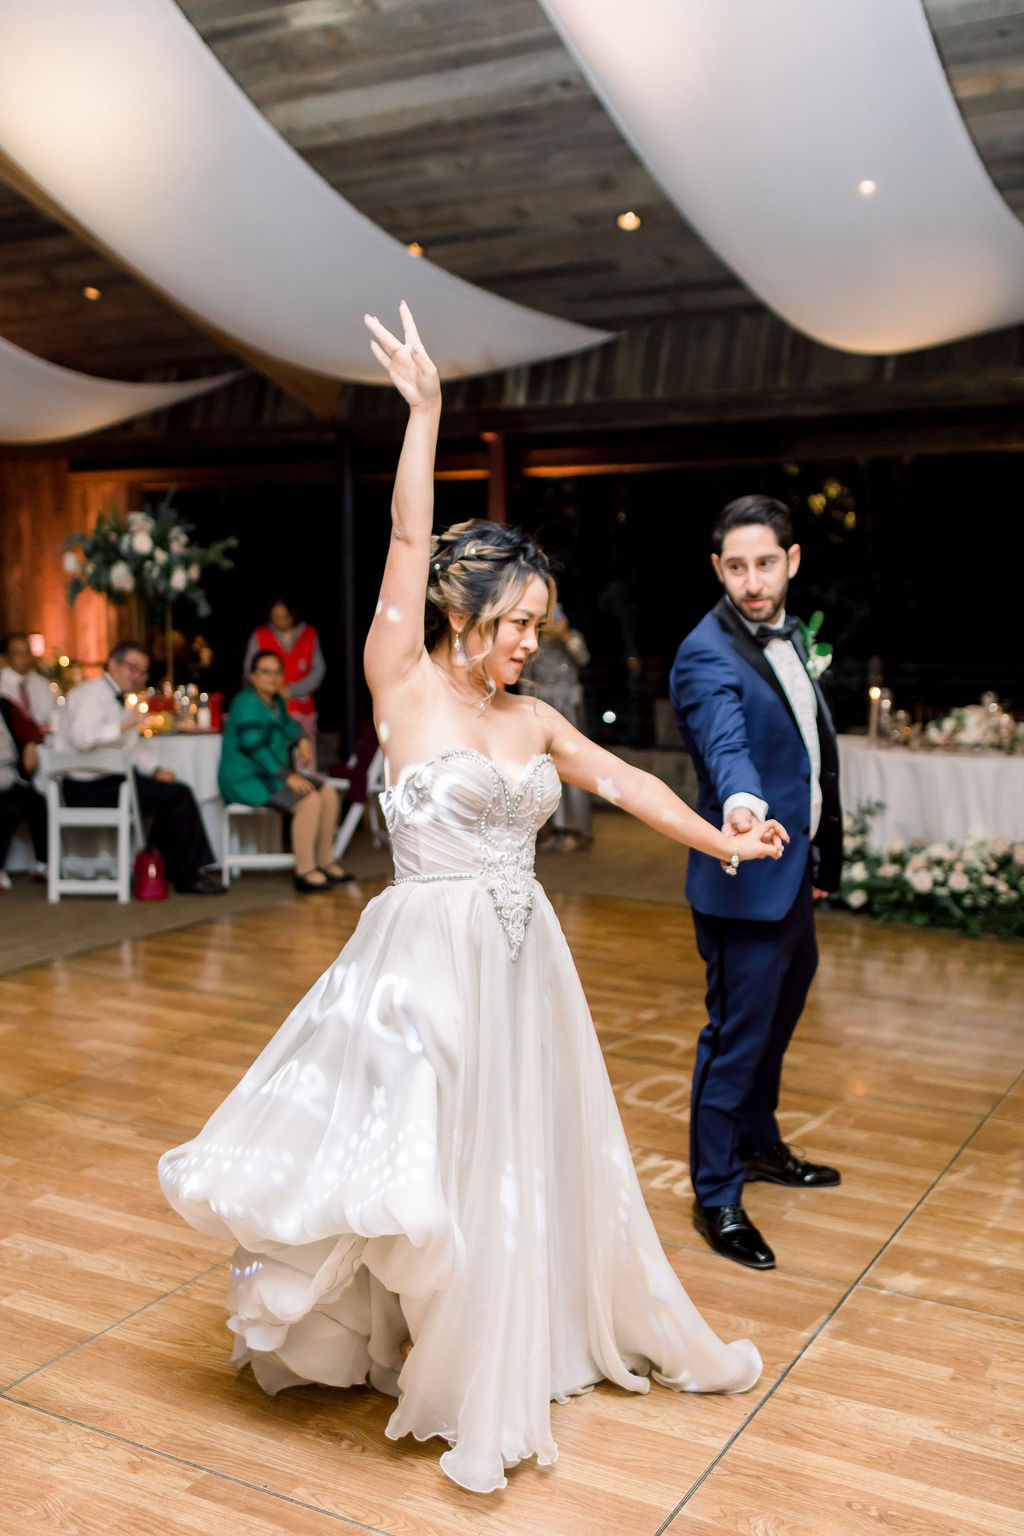 bride and groom first dance at wedding reception 